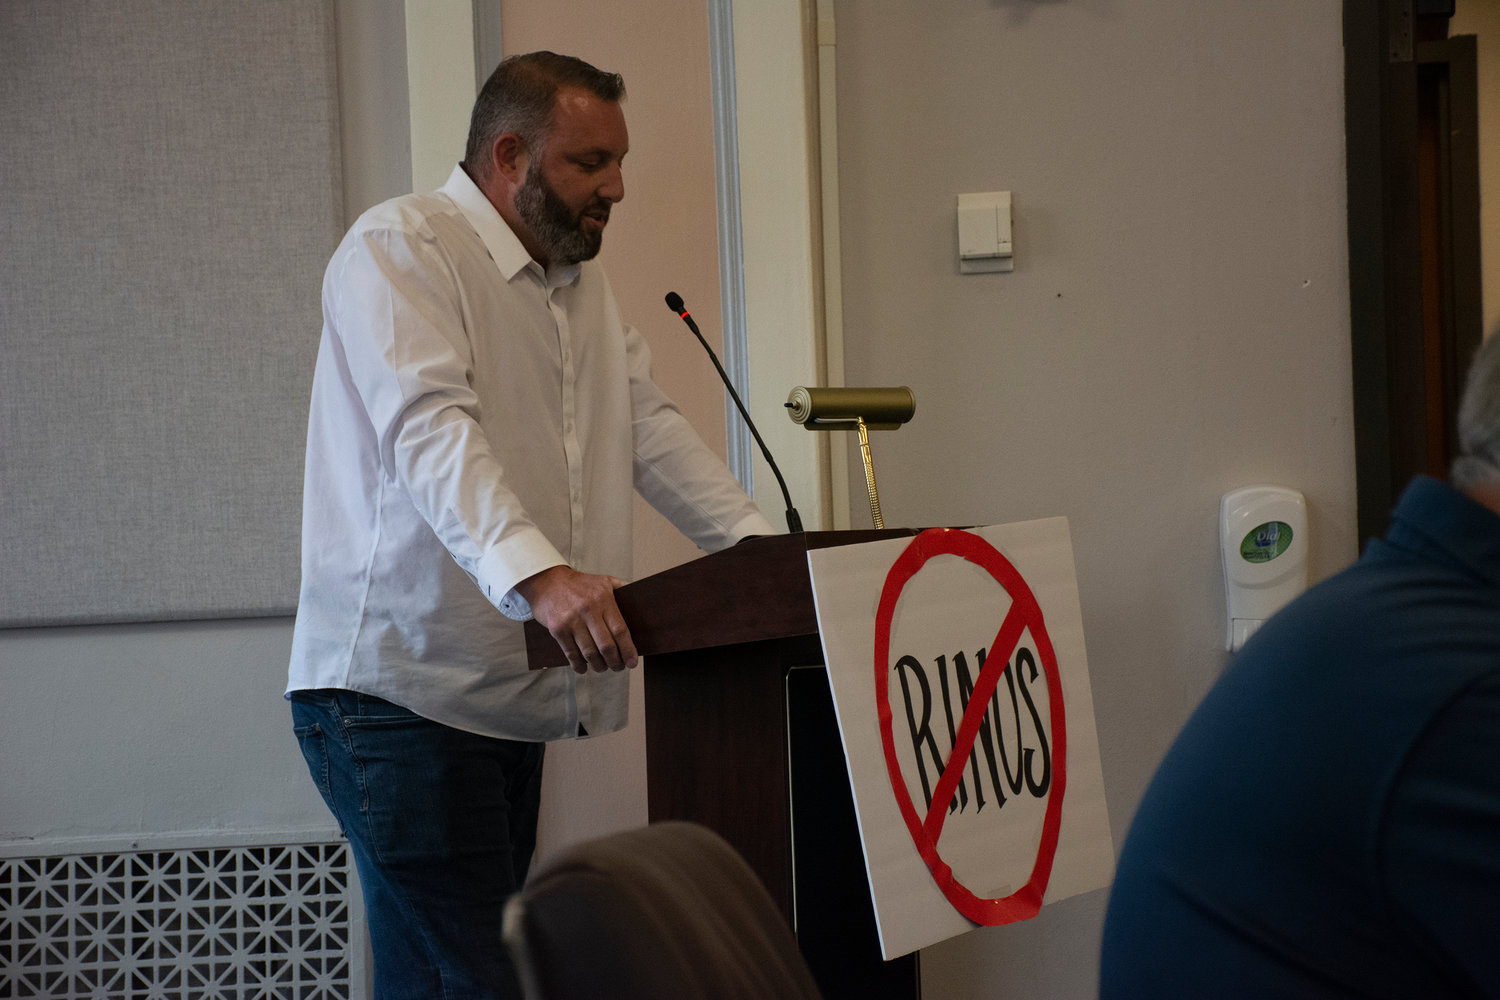 Winlock Mayor Brandon Svenson brought a "visual aid" Tuesday and told county commissioners they took too long to pass a proclamation aimed at fending off firearm restrictions.